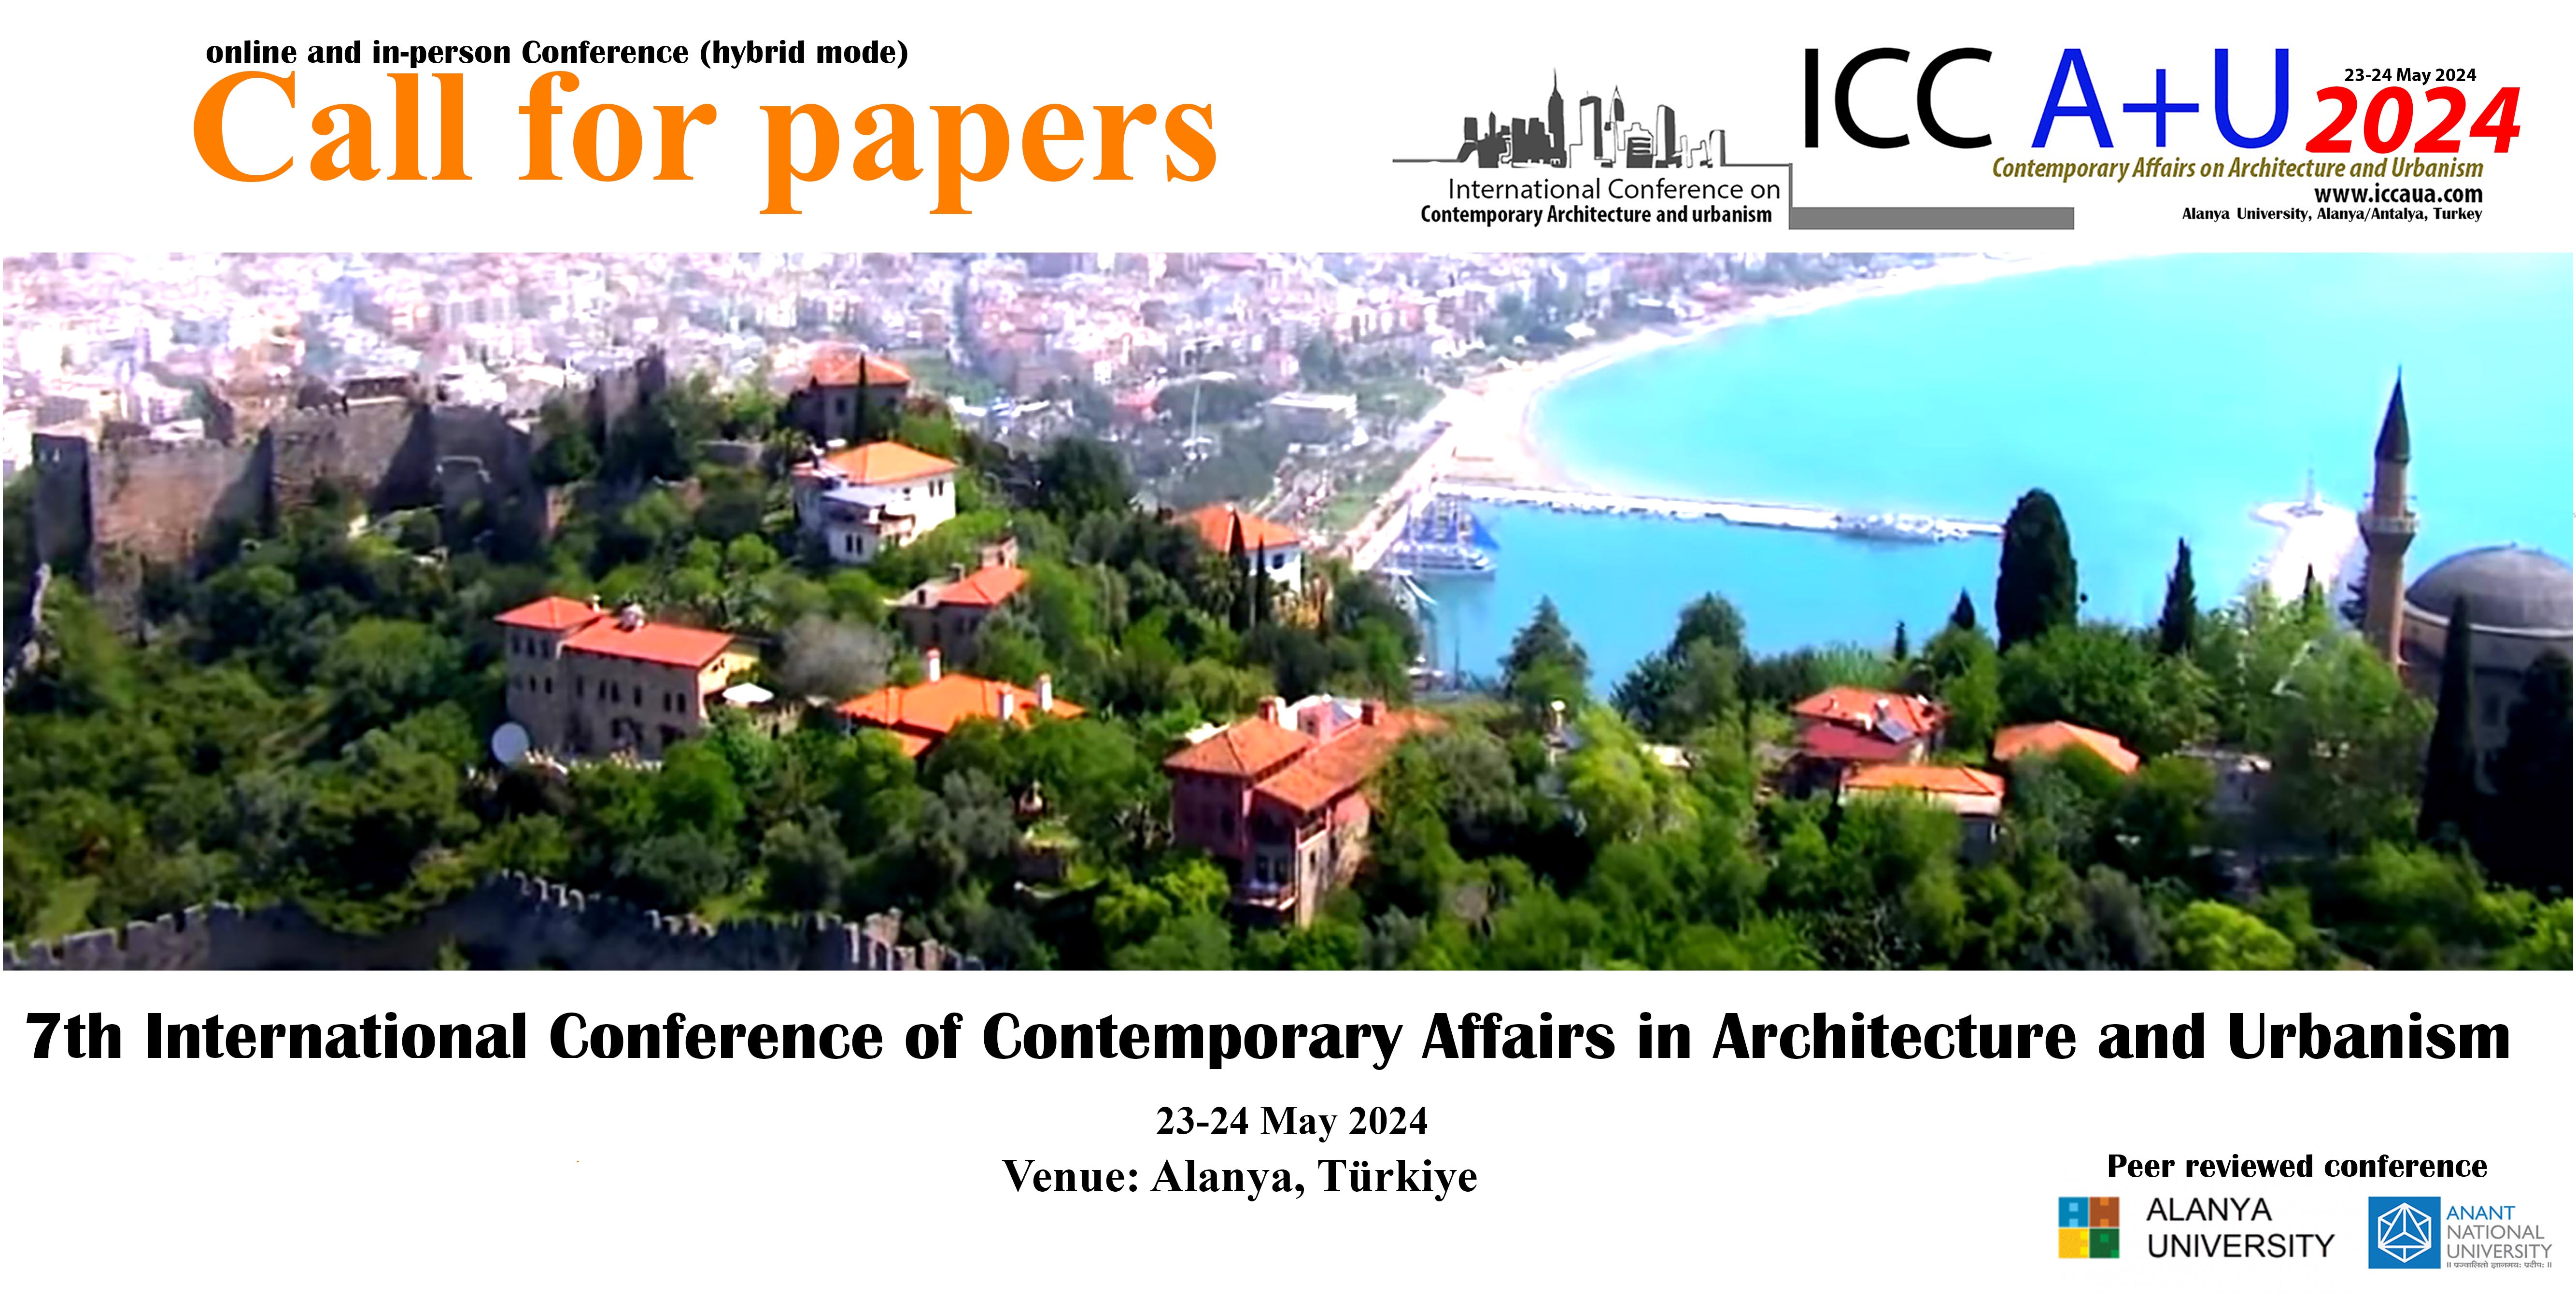 5th International conference of Contemporary Affairs on Architecture and Urbanism 2022 ICCAUA ALANYA HEP UNIVERSITY